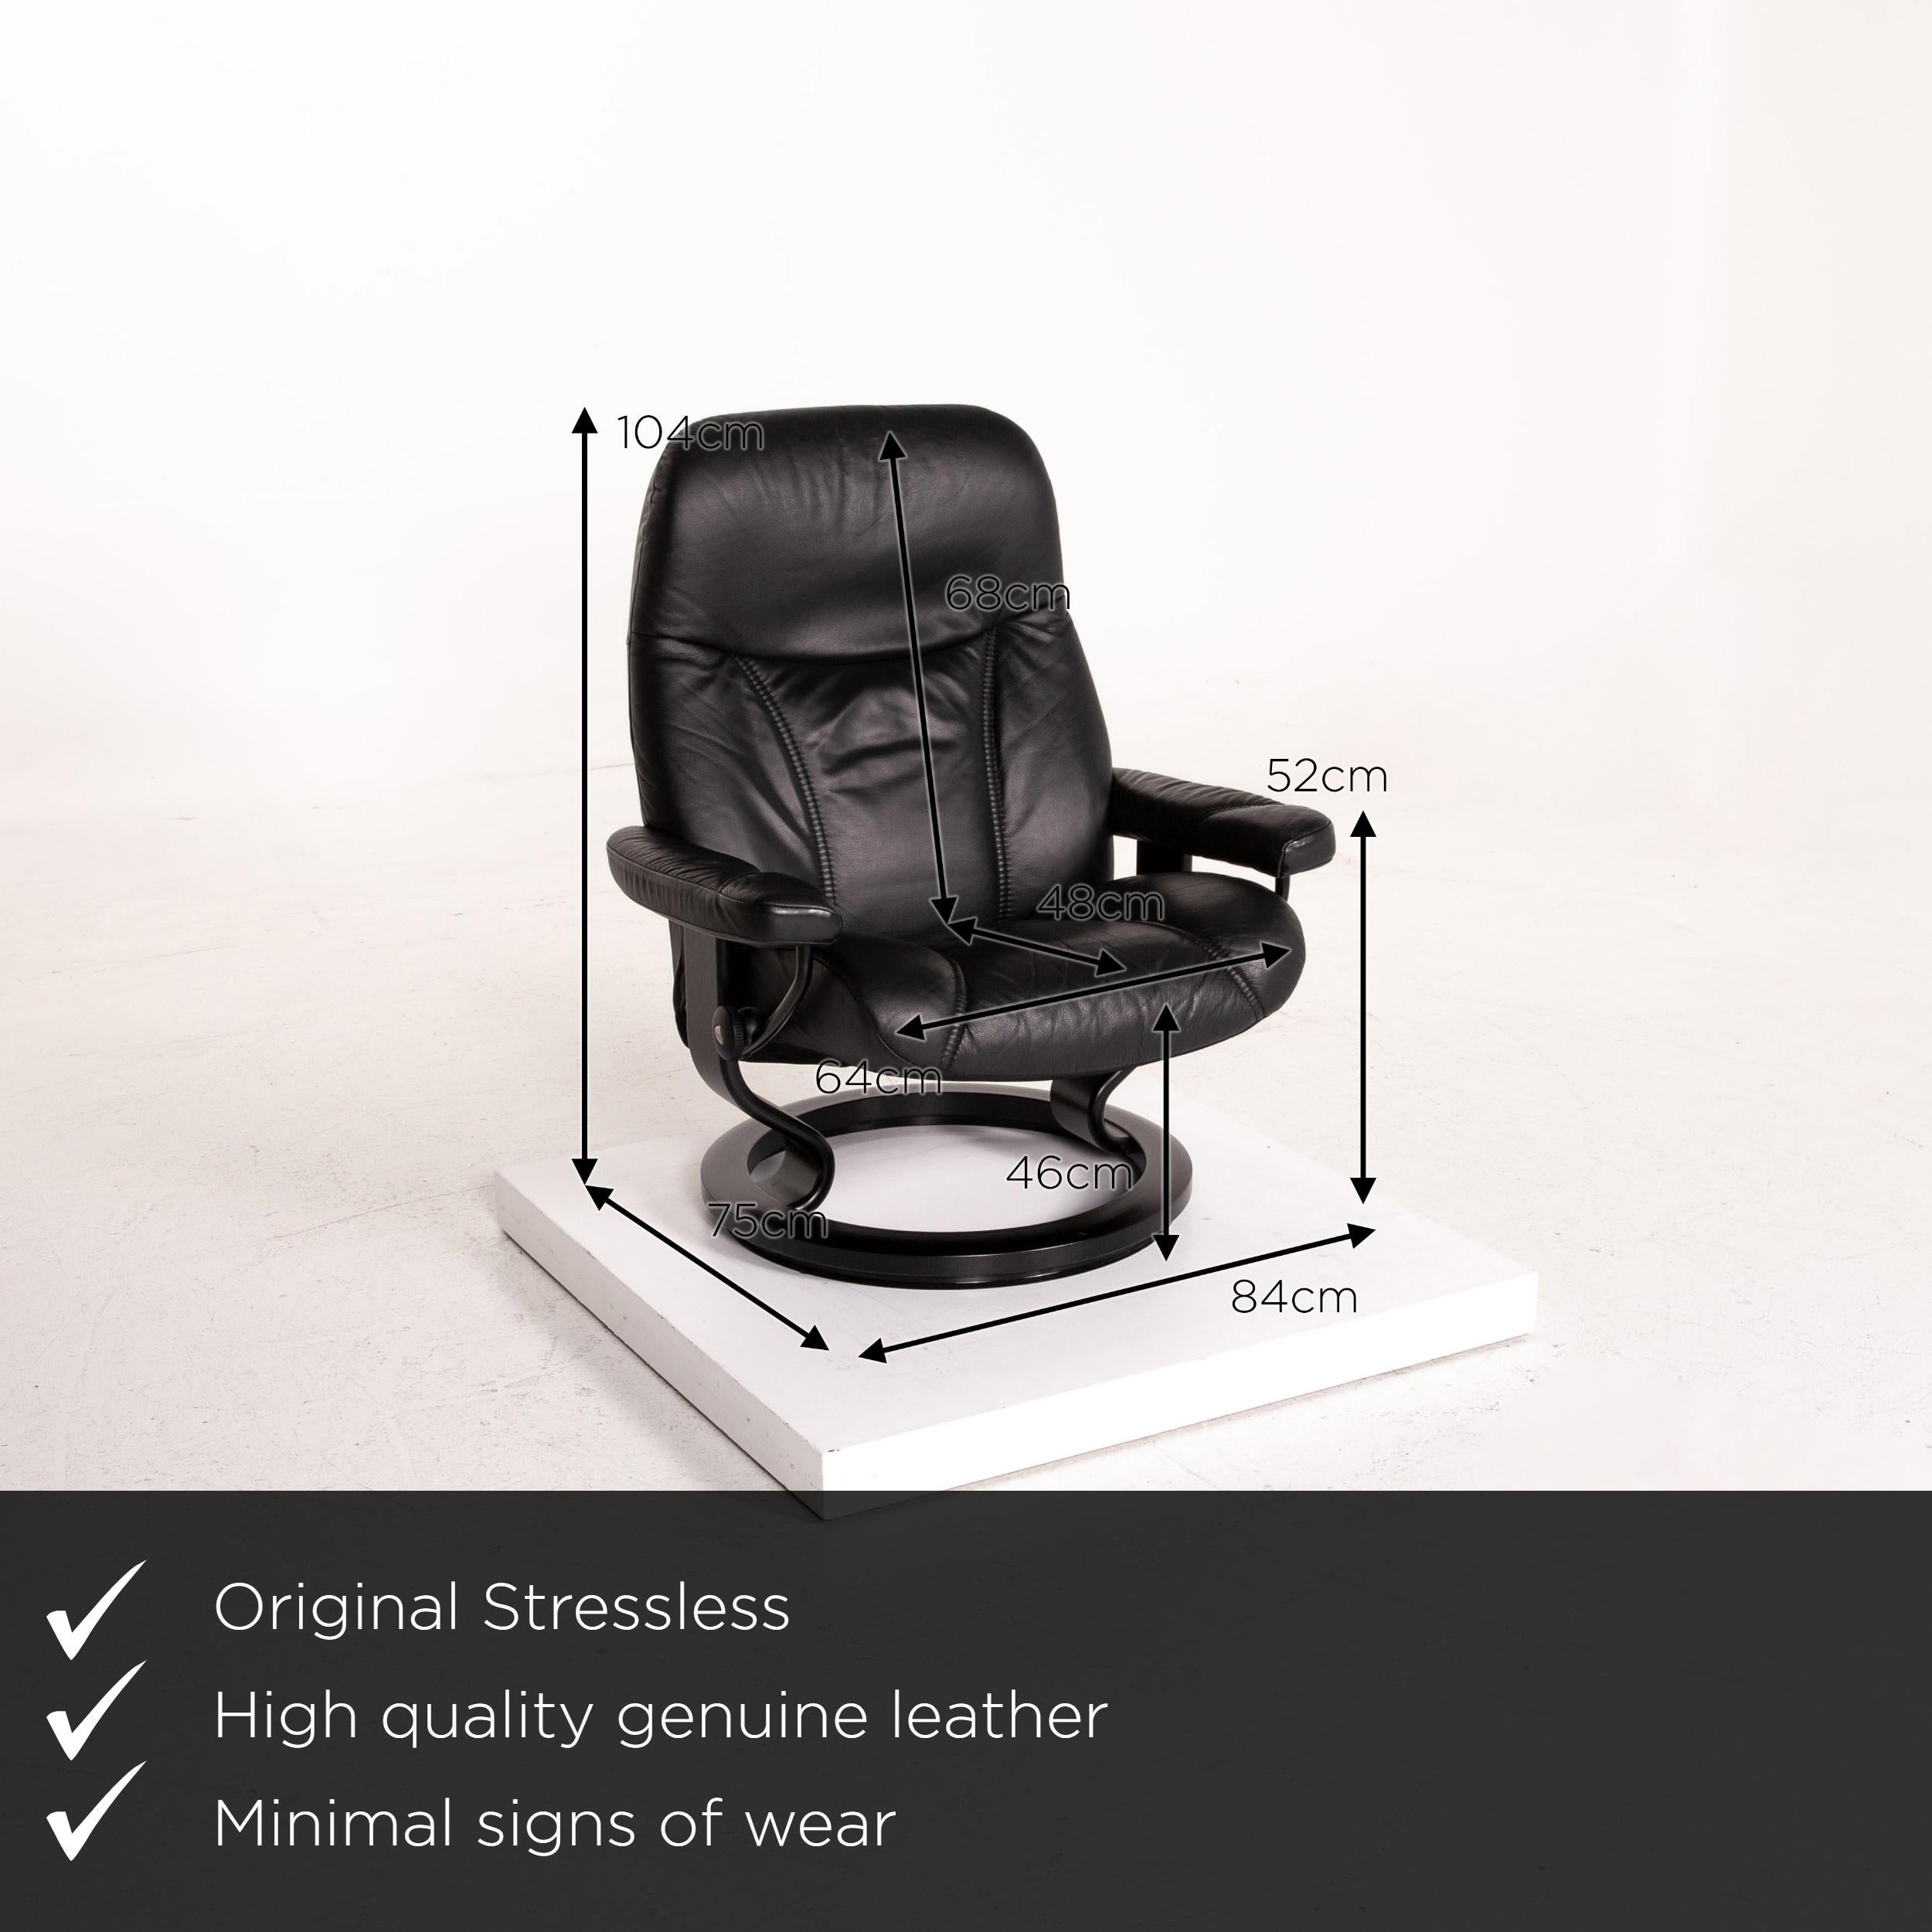 We present to you a Stressless Consul leather armchair incl. Stool black relaxation function.
 

 Product measurements in centimeters:
 

Depth 75
Width 84
Height 104
Seat height 46
Rest height 52
Seat depth 48
Seat width 64
Back height